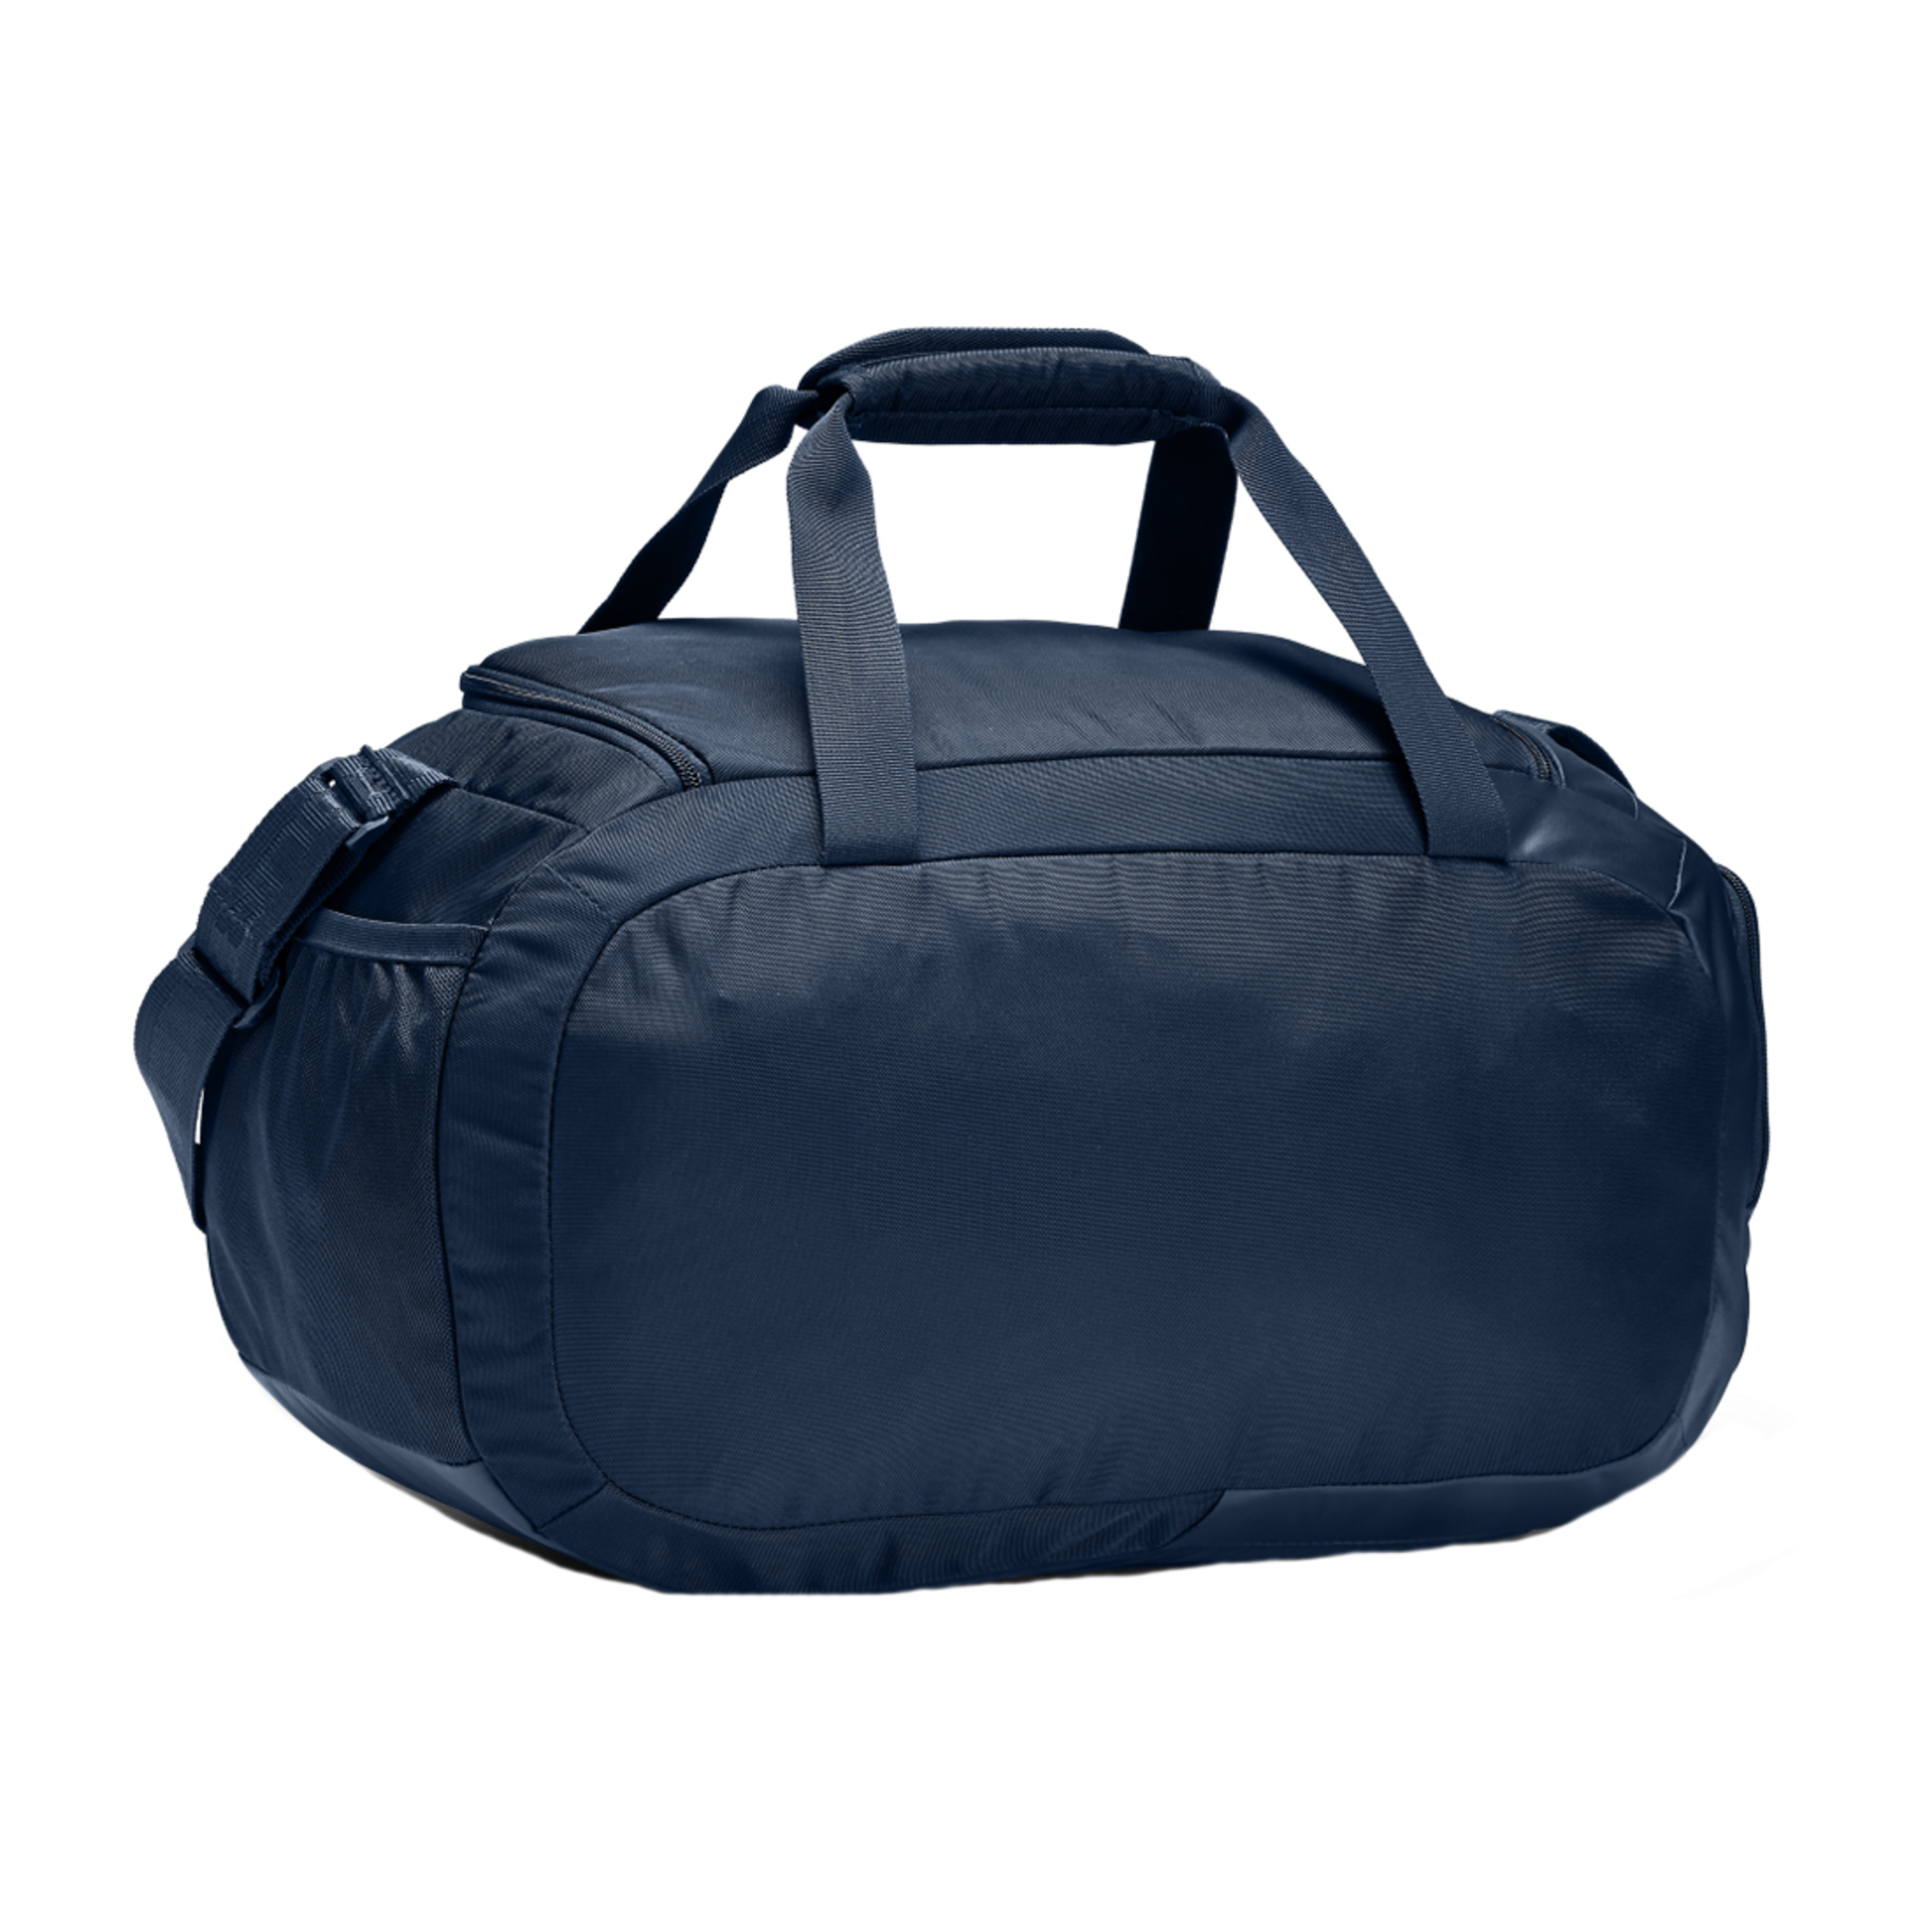 Under Armour Undeniable Duffel 4.0 Xs 1342655-408